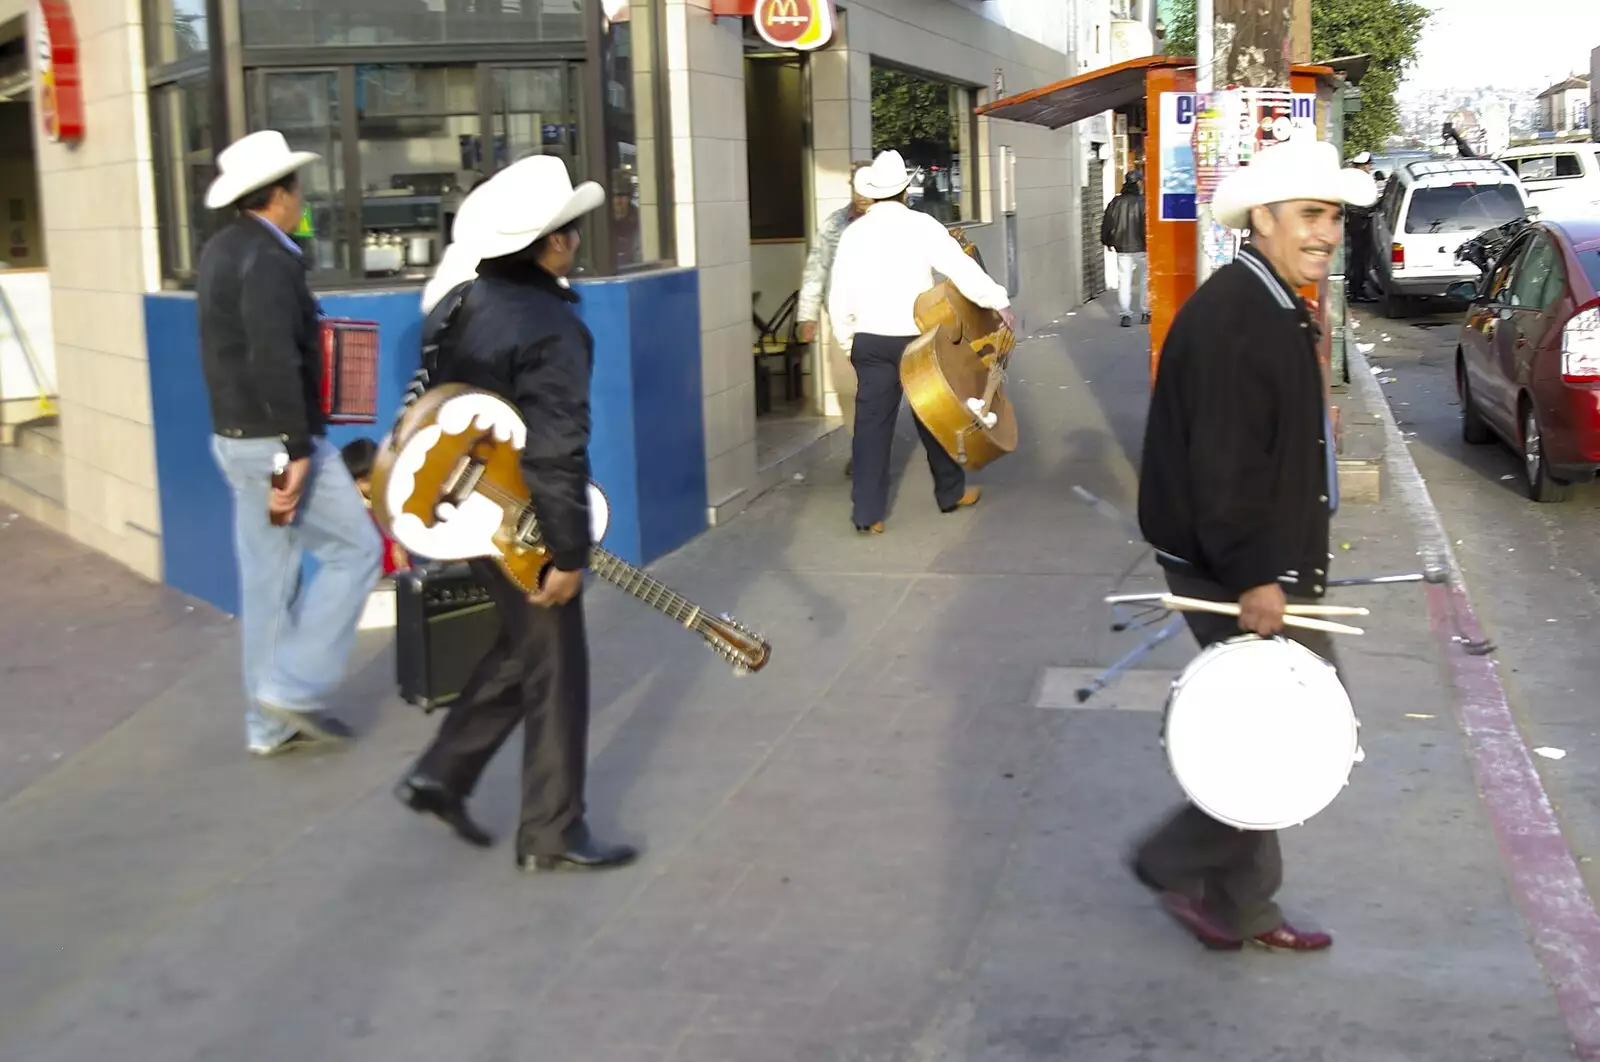 Bands of musicians roam the streets, from Rosarito and Tijuana, Baja California, Mexico - 2nd March 2008